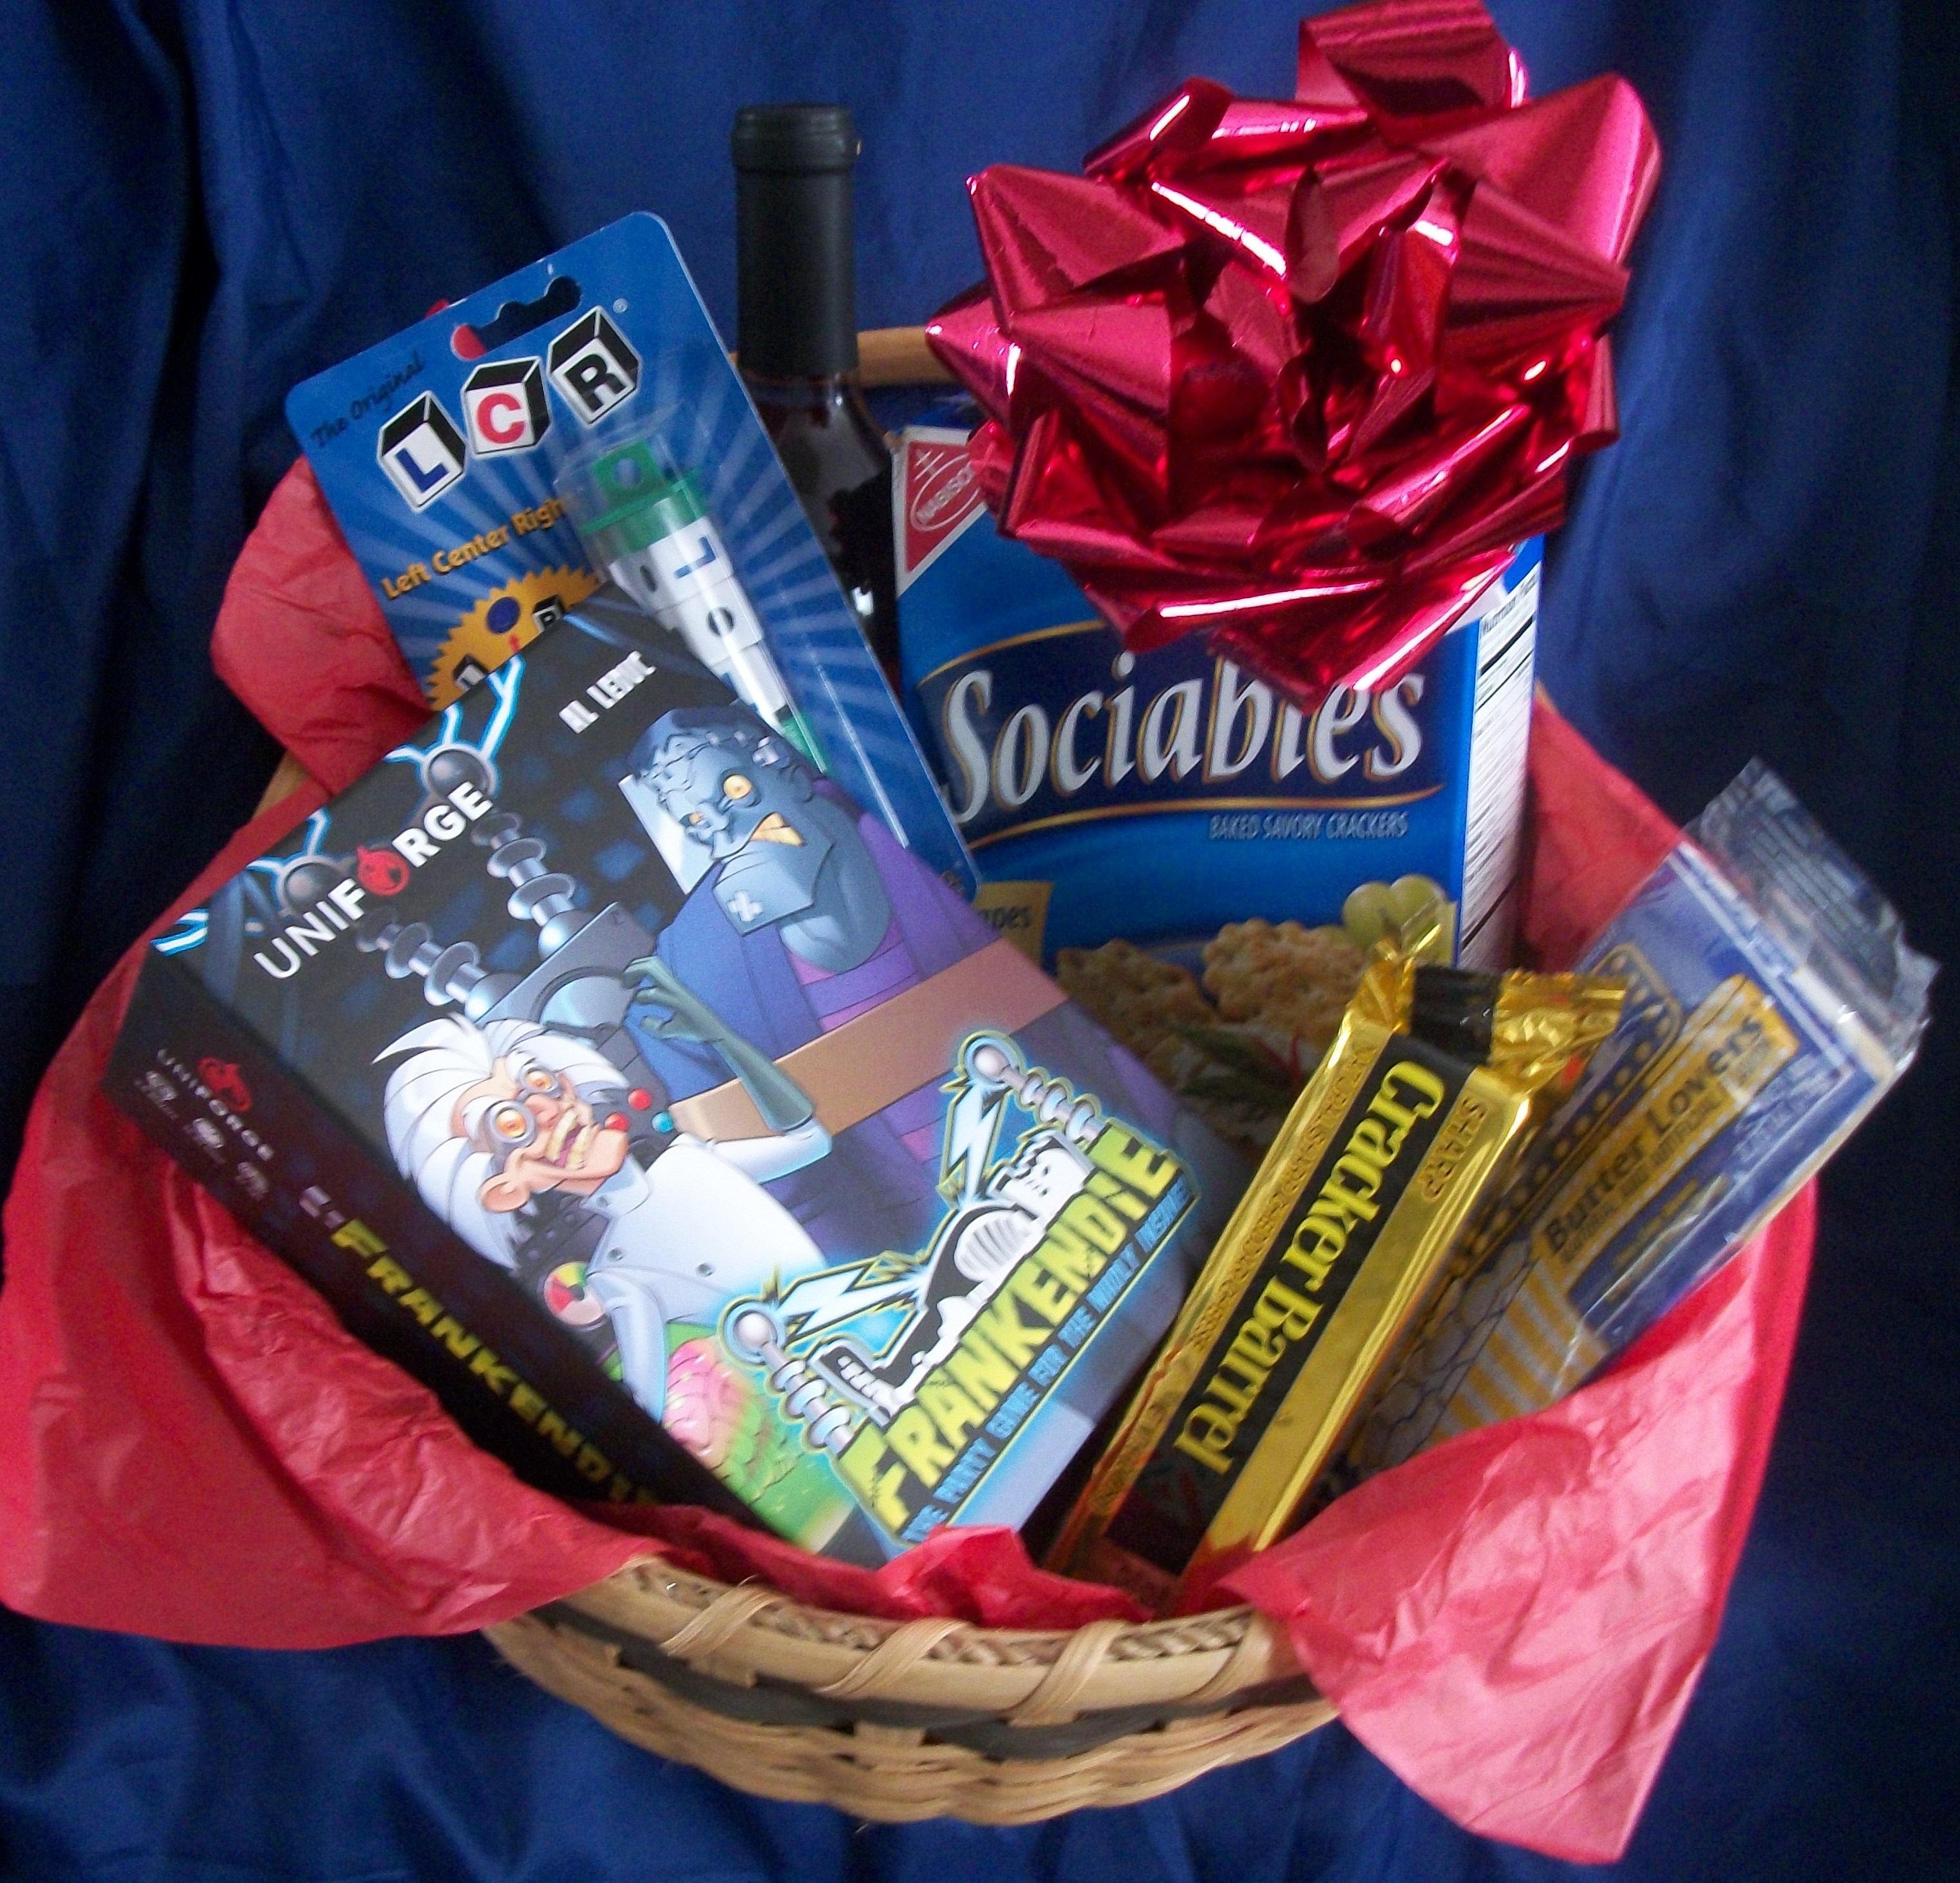 New Year S Eve Fun And Games Gift Basket All About Fun And Games